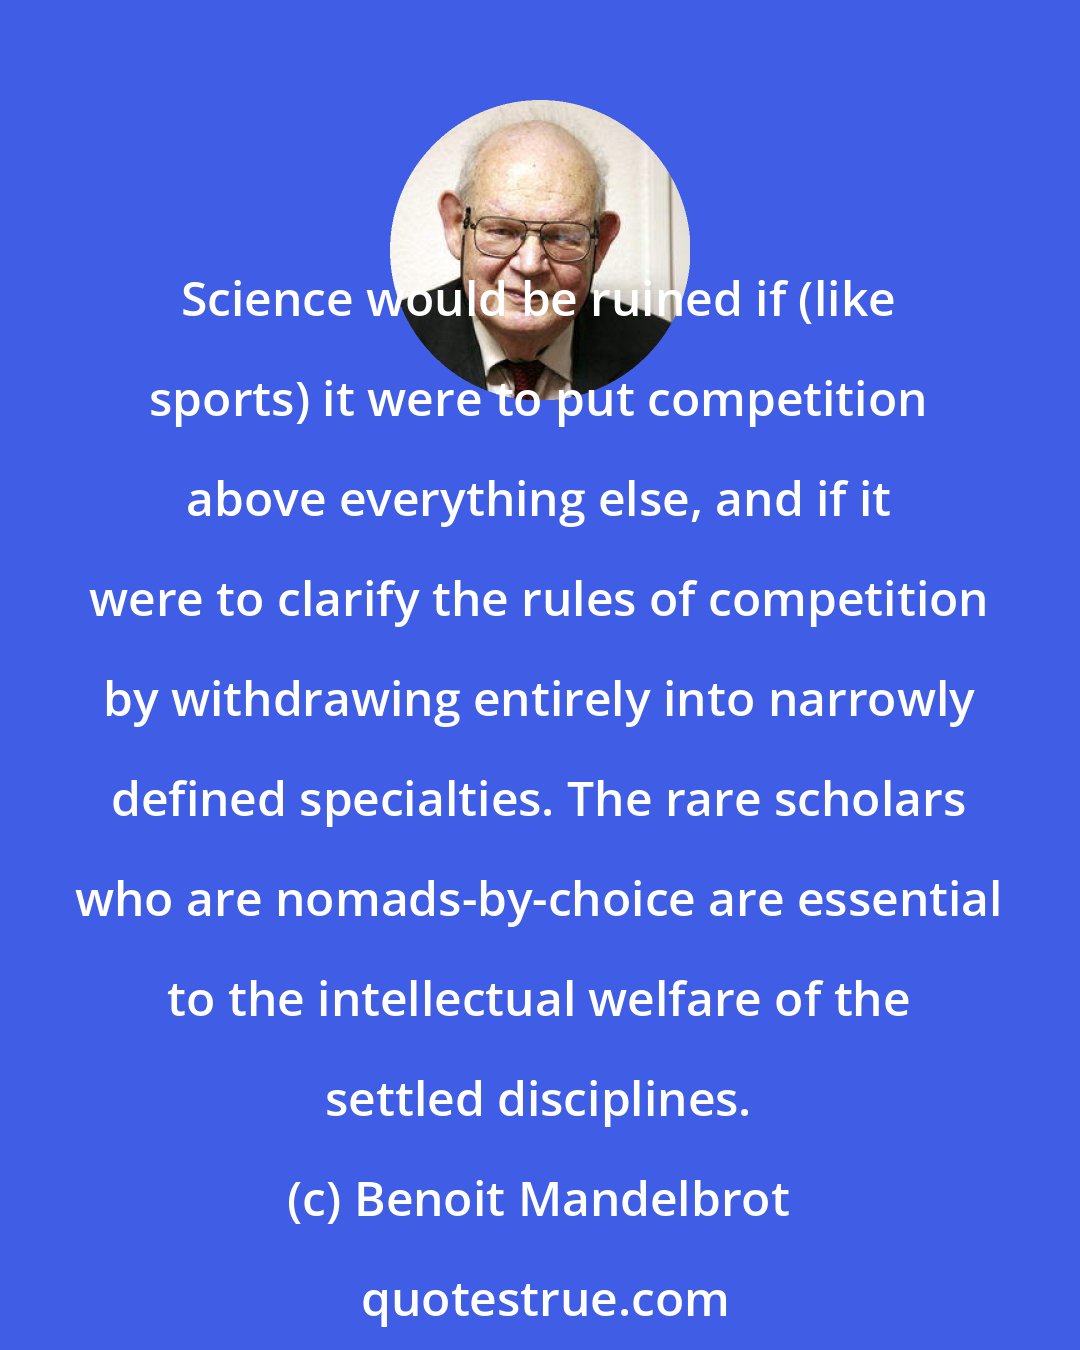 Benoit Mandelbrot: Science would be ruined if (like sports) it were to put competition above everything else, and if it were to clarify the rules of competition by withdrawing entirely into narrowly defined specialties. The rare scholars who are nomads-by-choice are essential to the intellectual welfare of the settled disciplines.